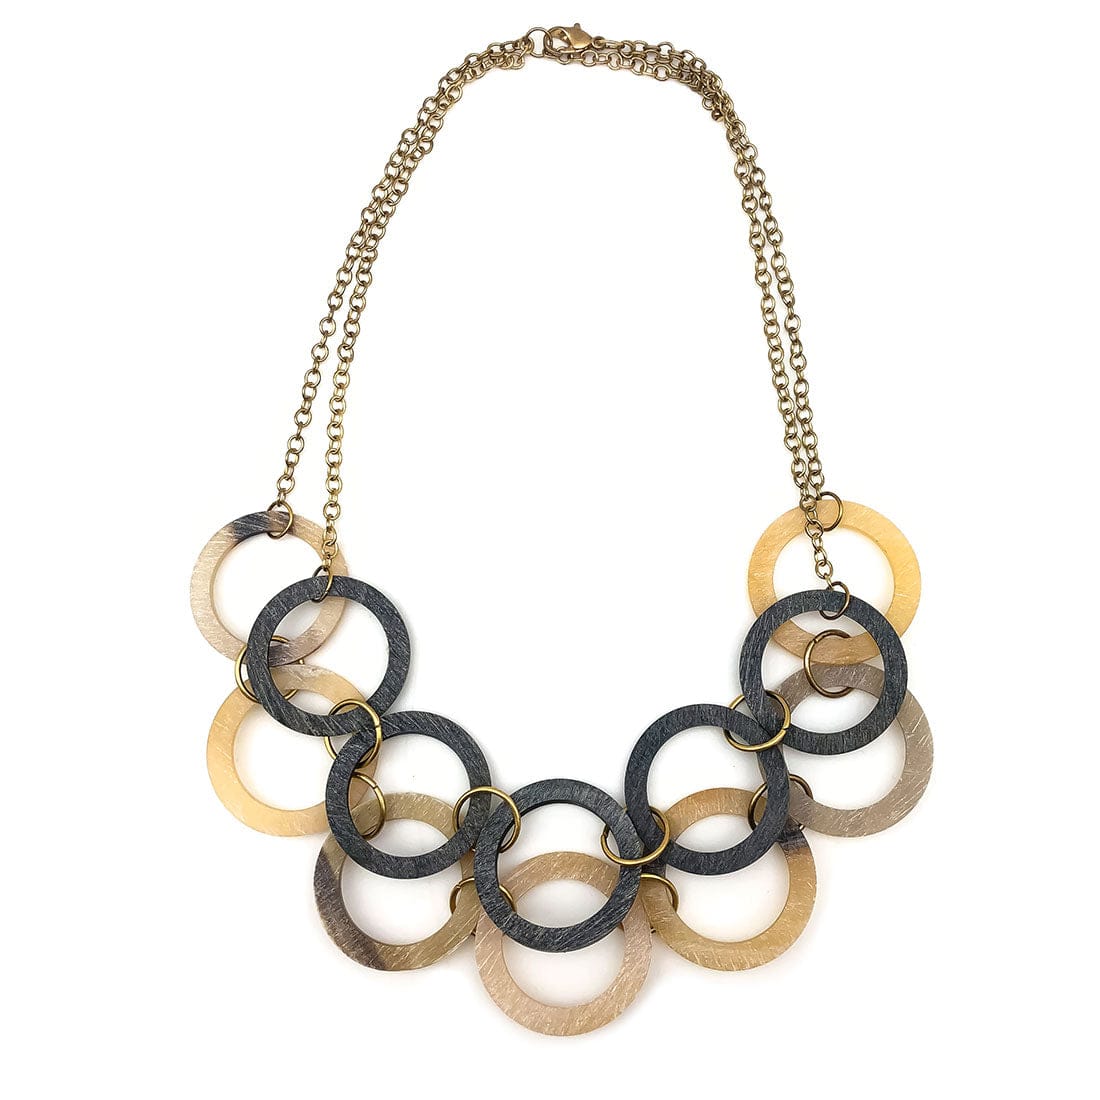 Anju Omala Silver Fog Necklace - Large Rings - Five and Divine